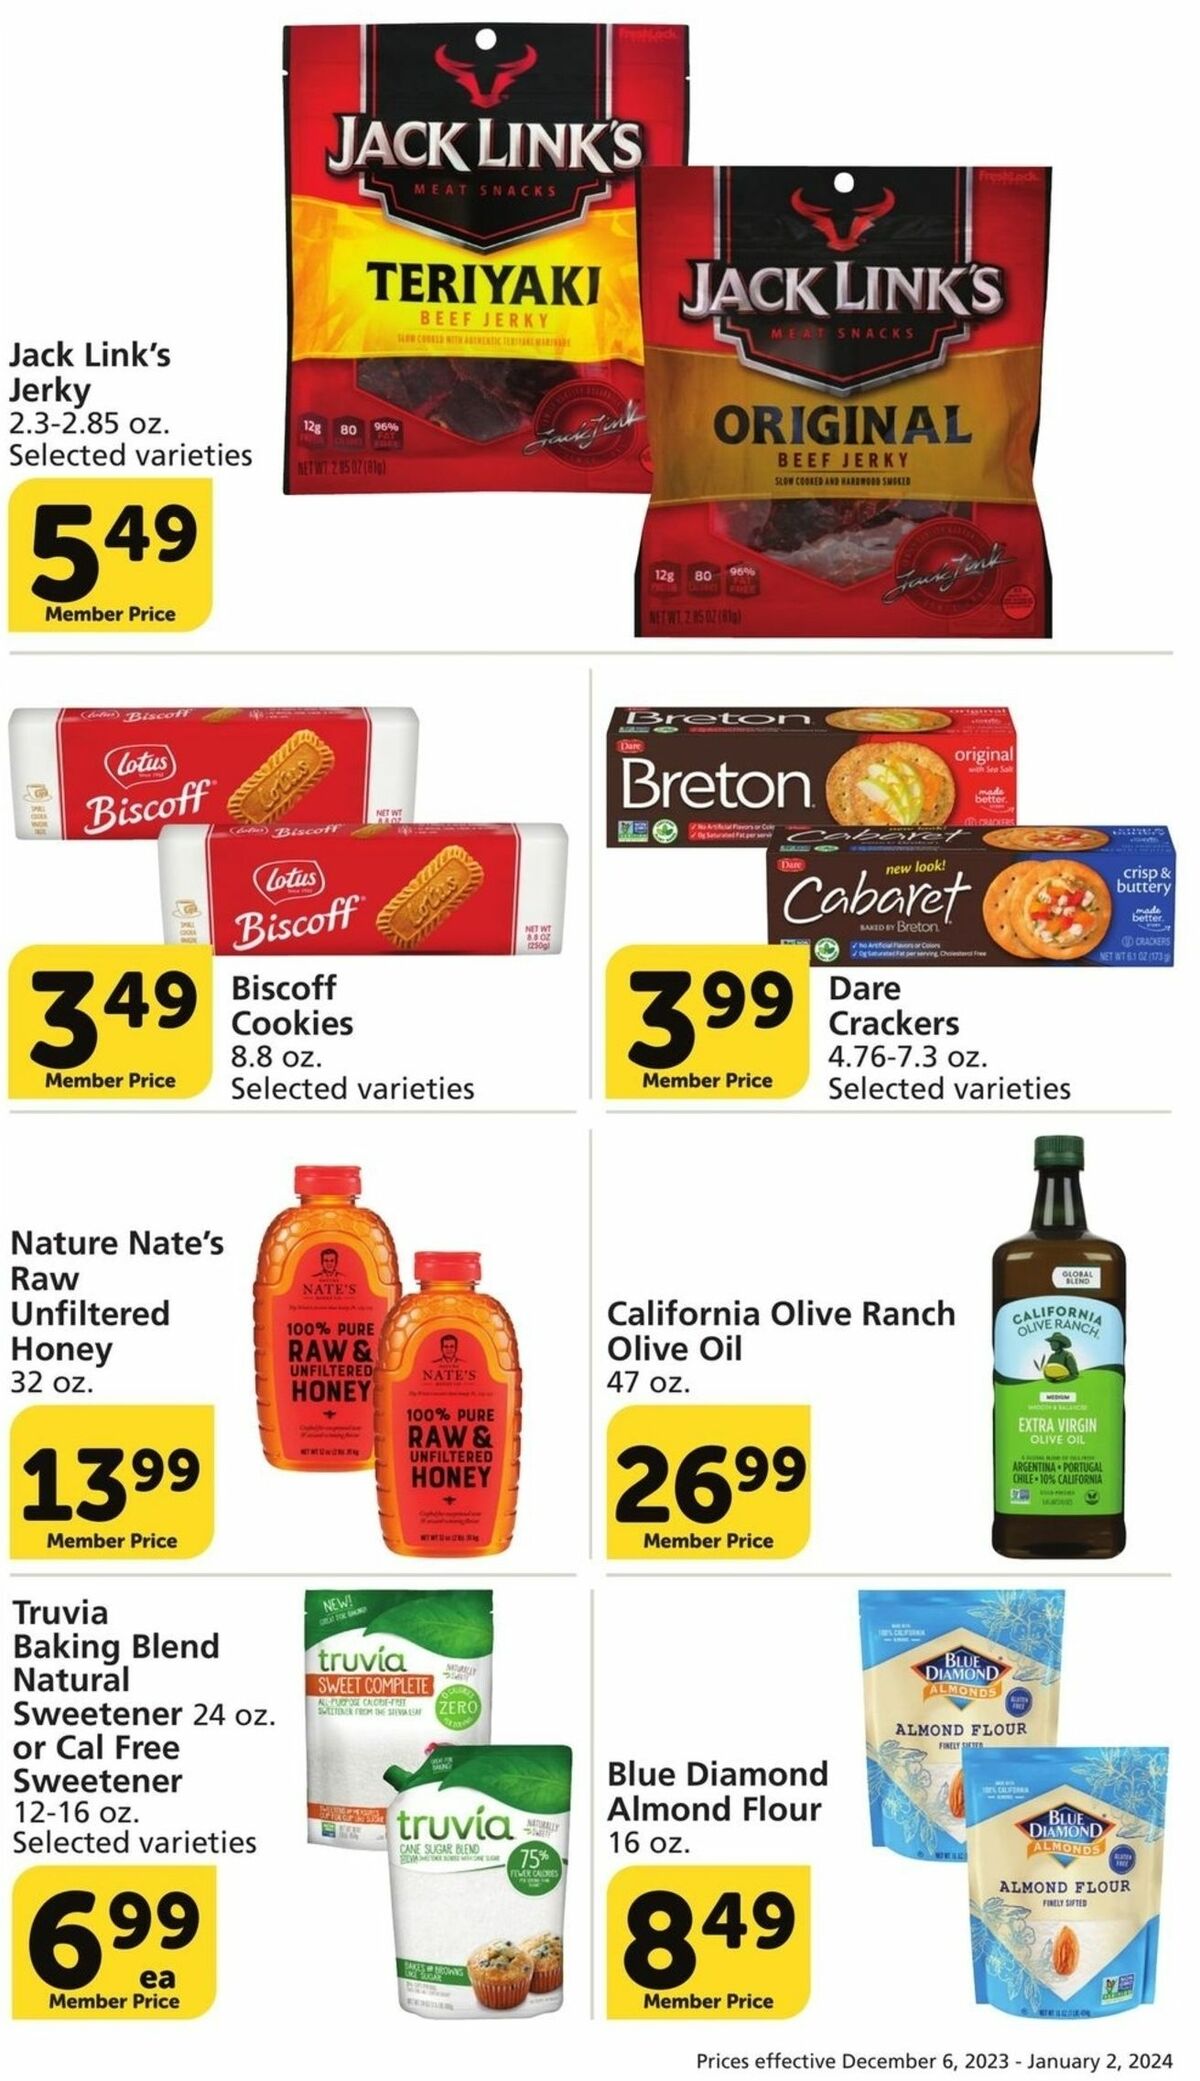 Vons Big Book of Savings Weekly Ad from December 6